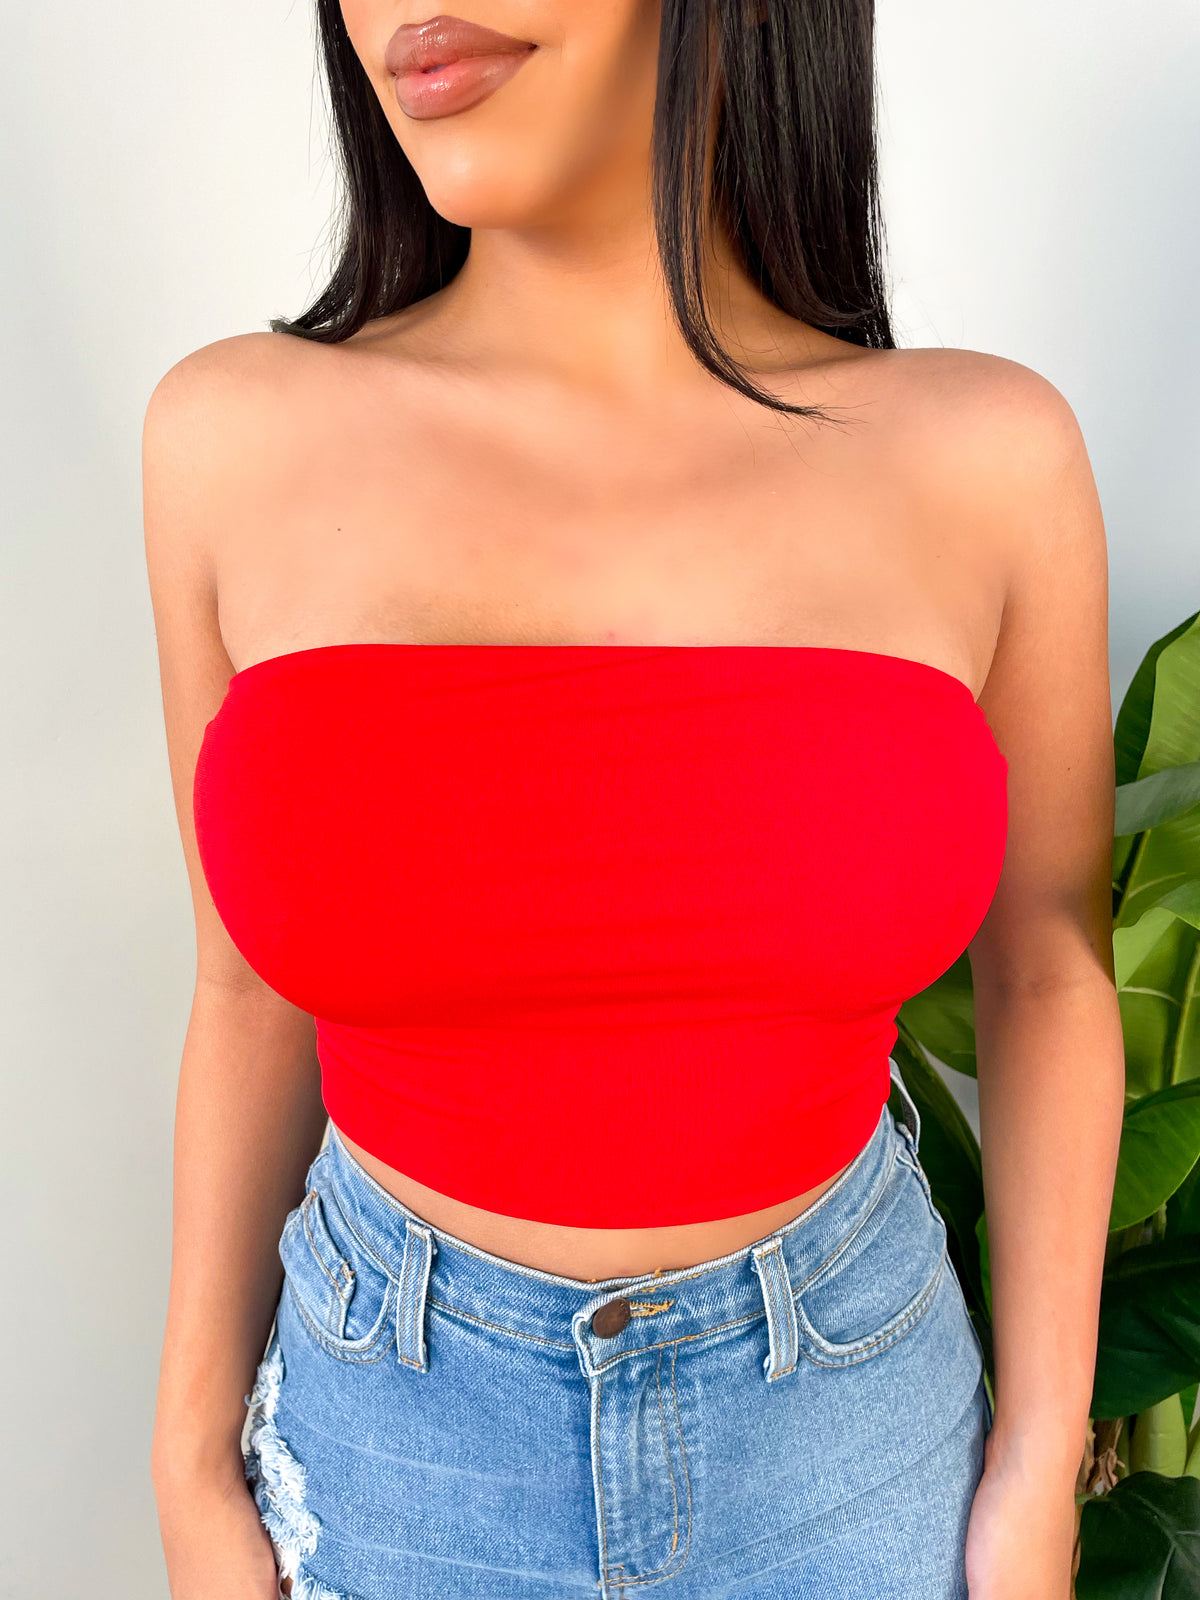 red tube top, crop top, strapless